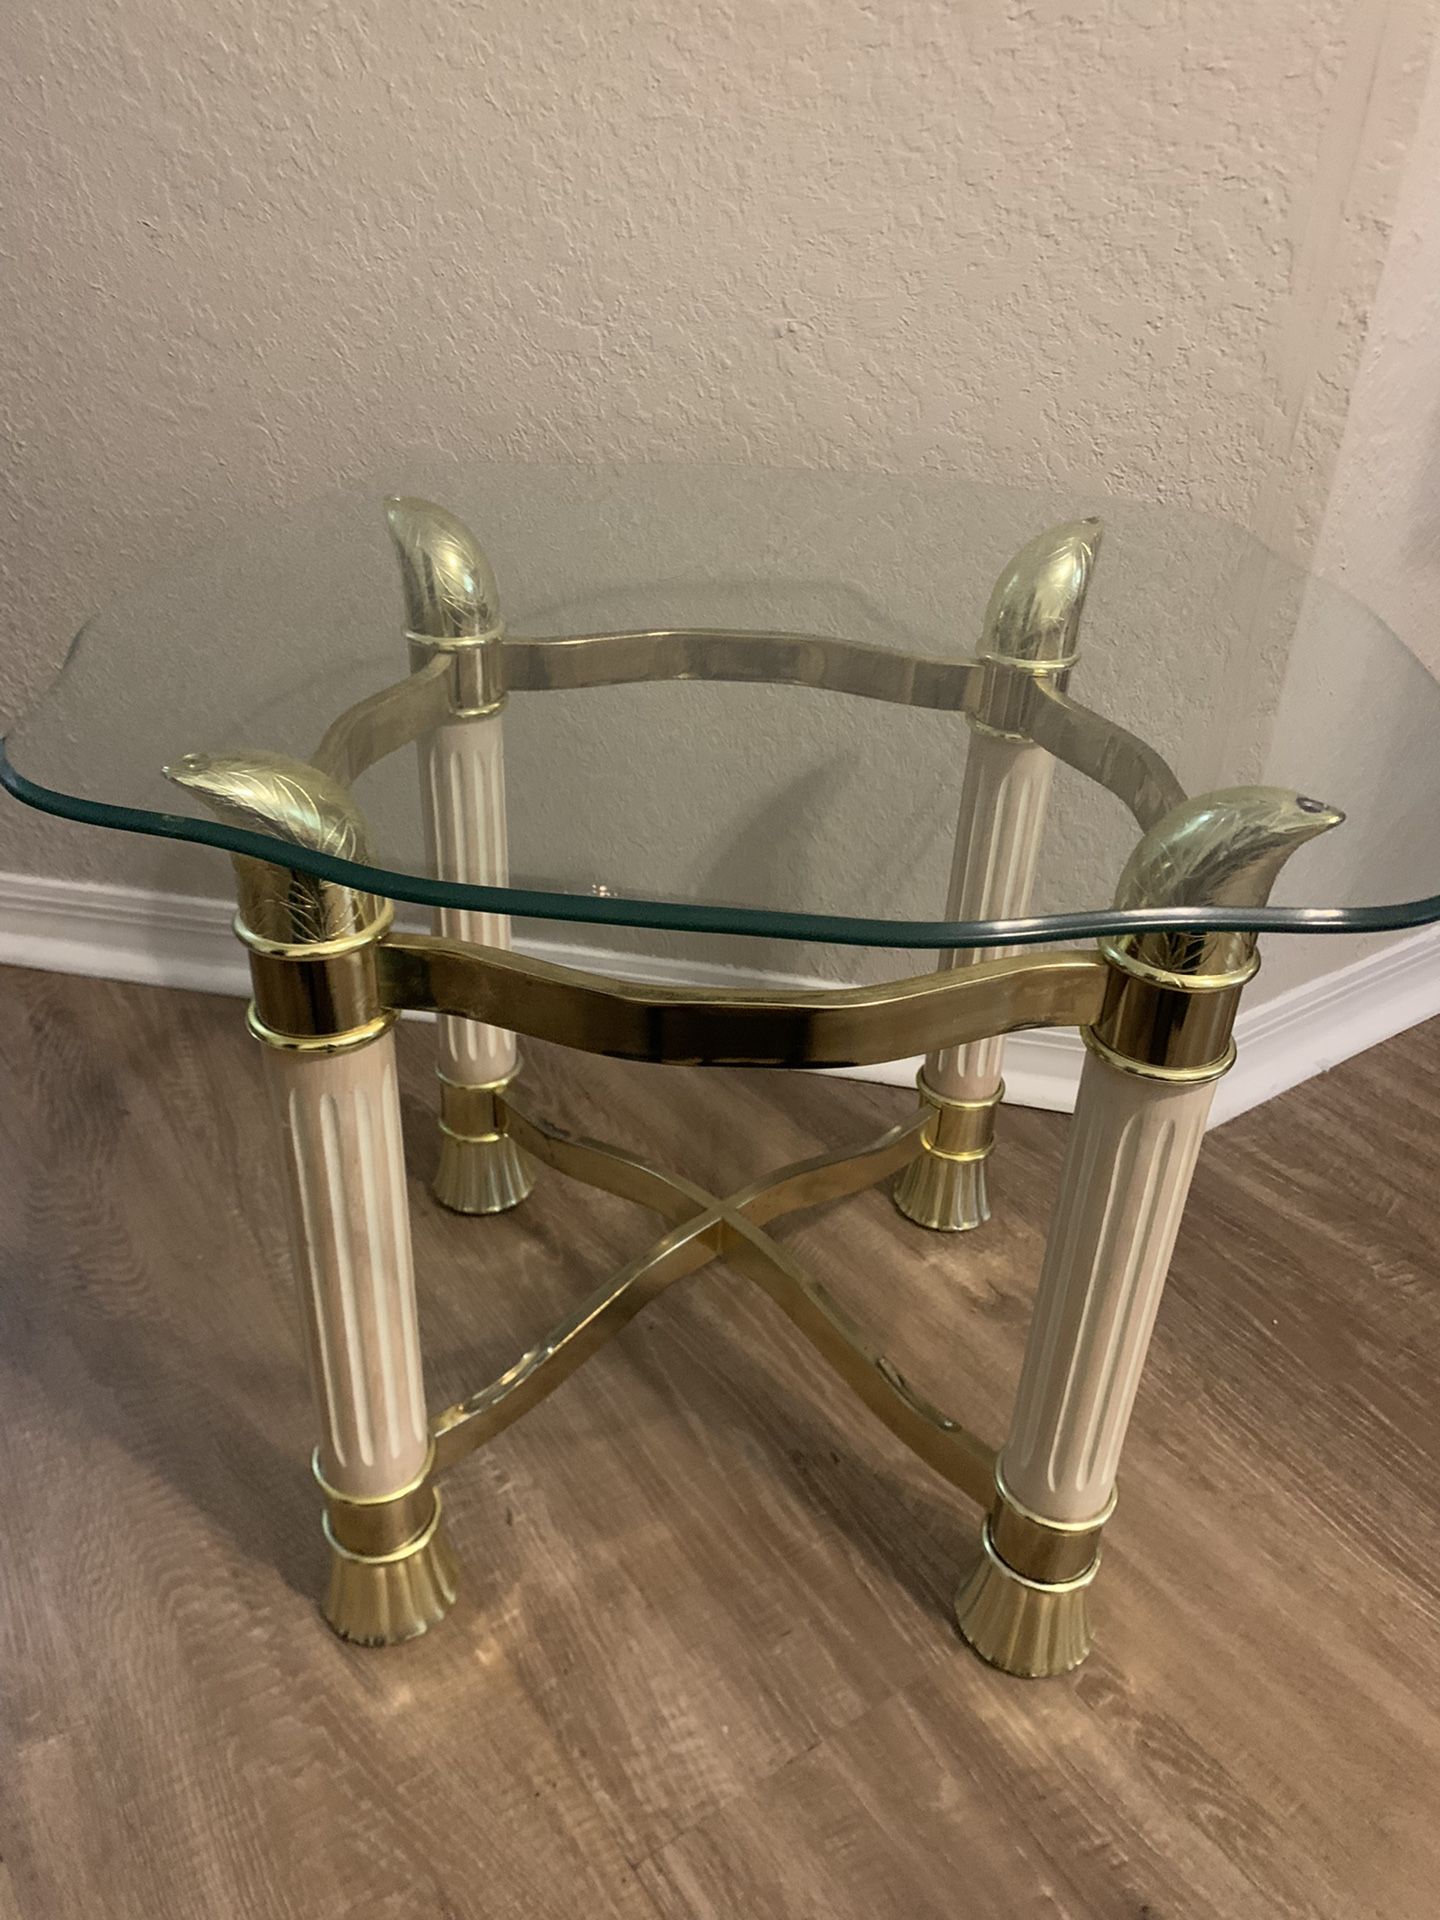 Small living room table, and glass living room Furniture ( 4 Shelf)